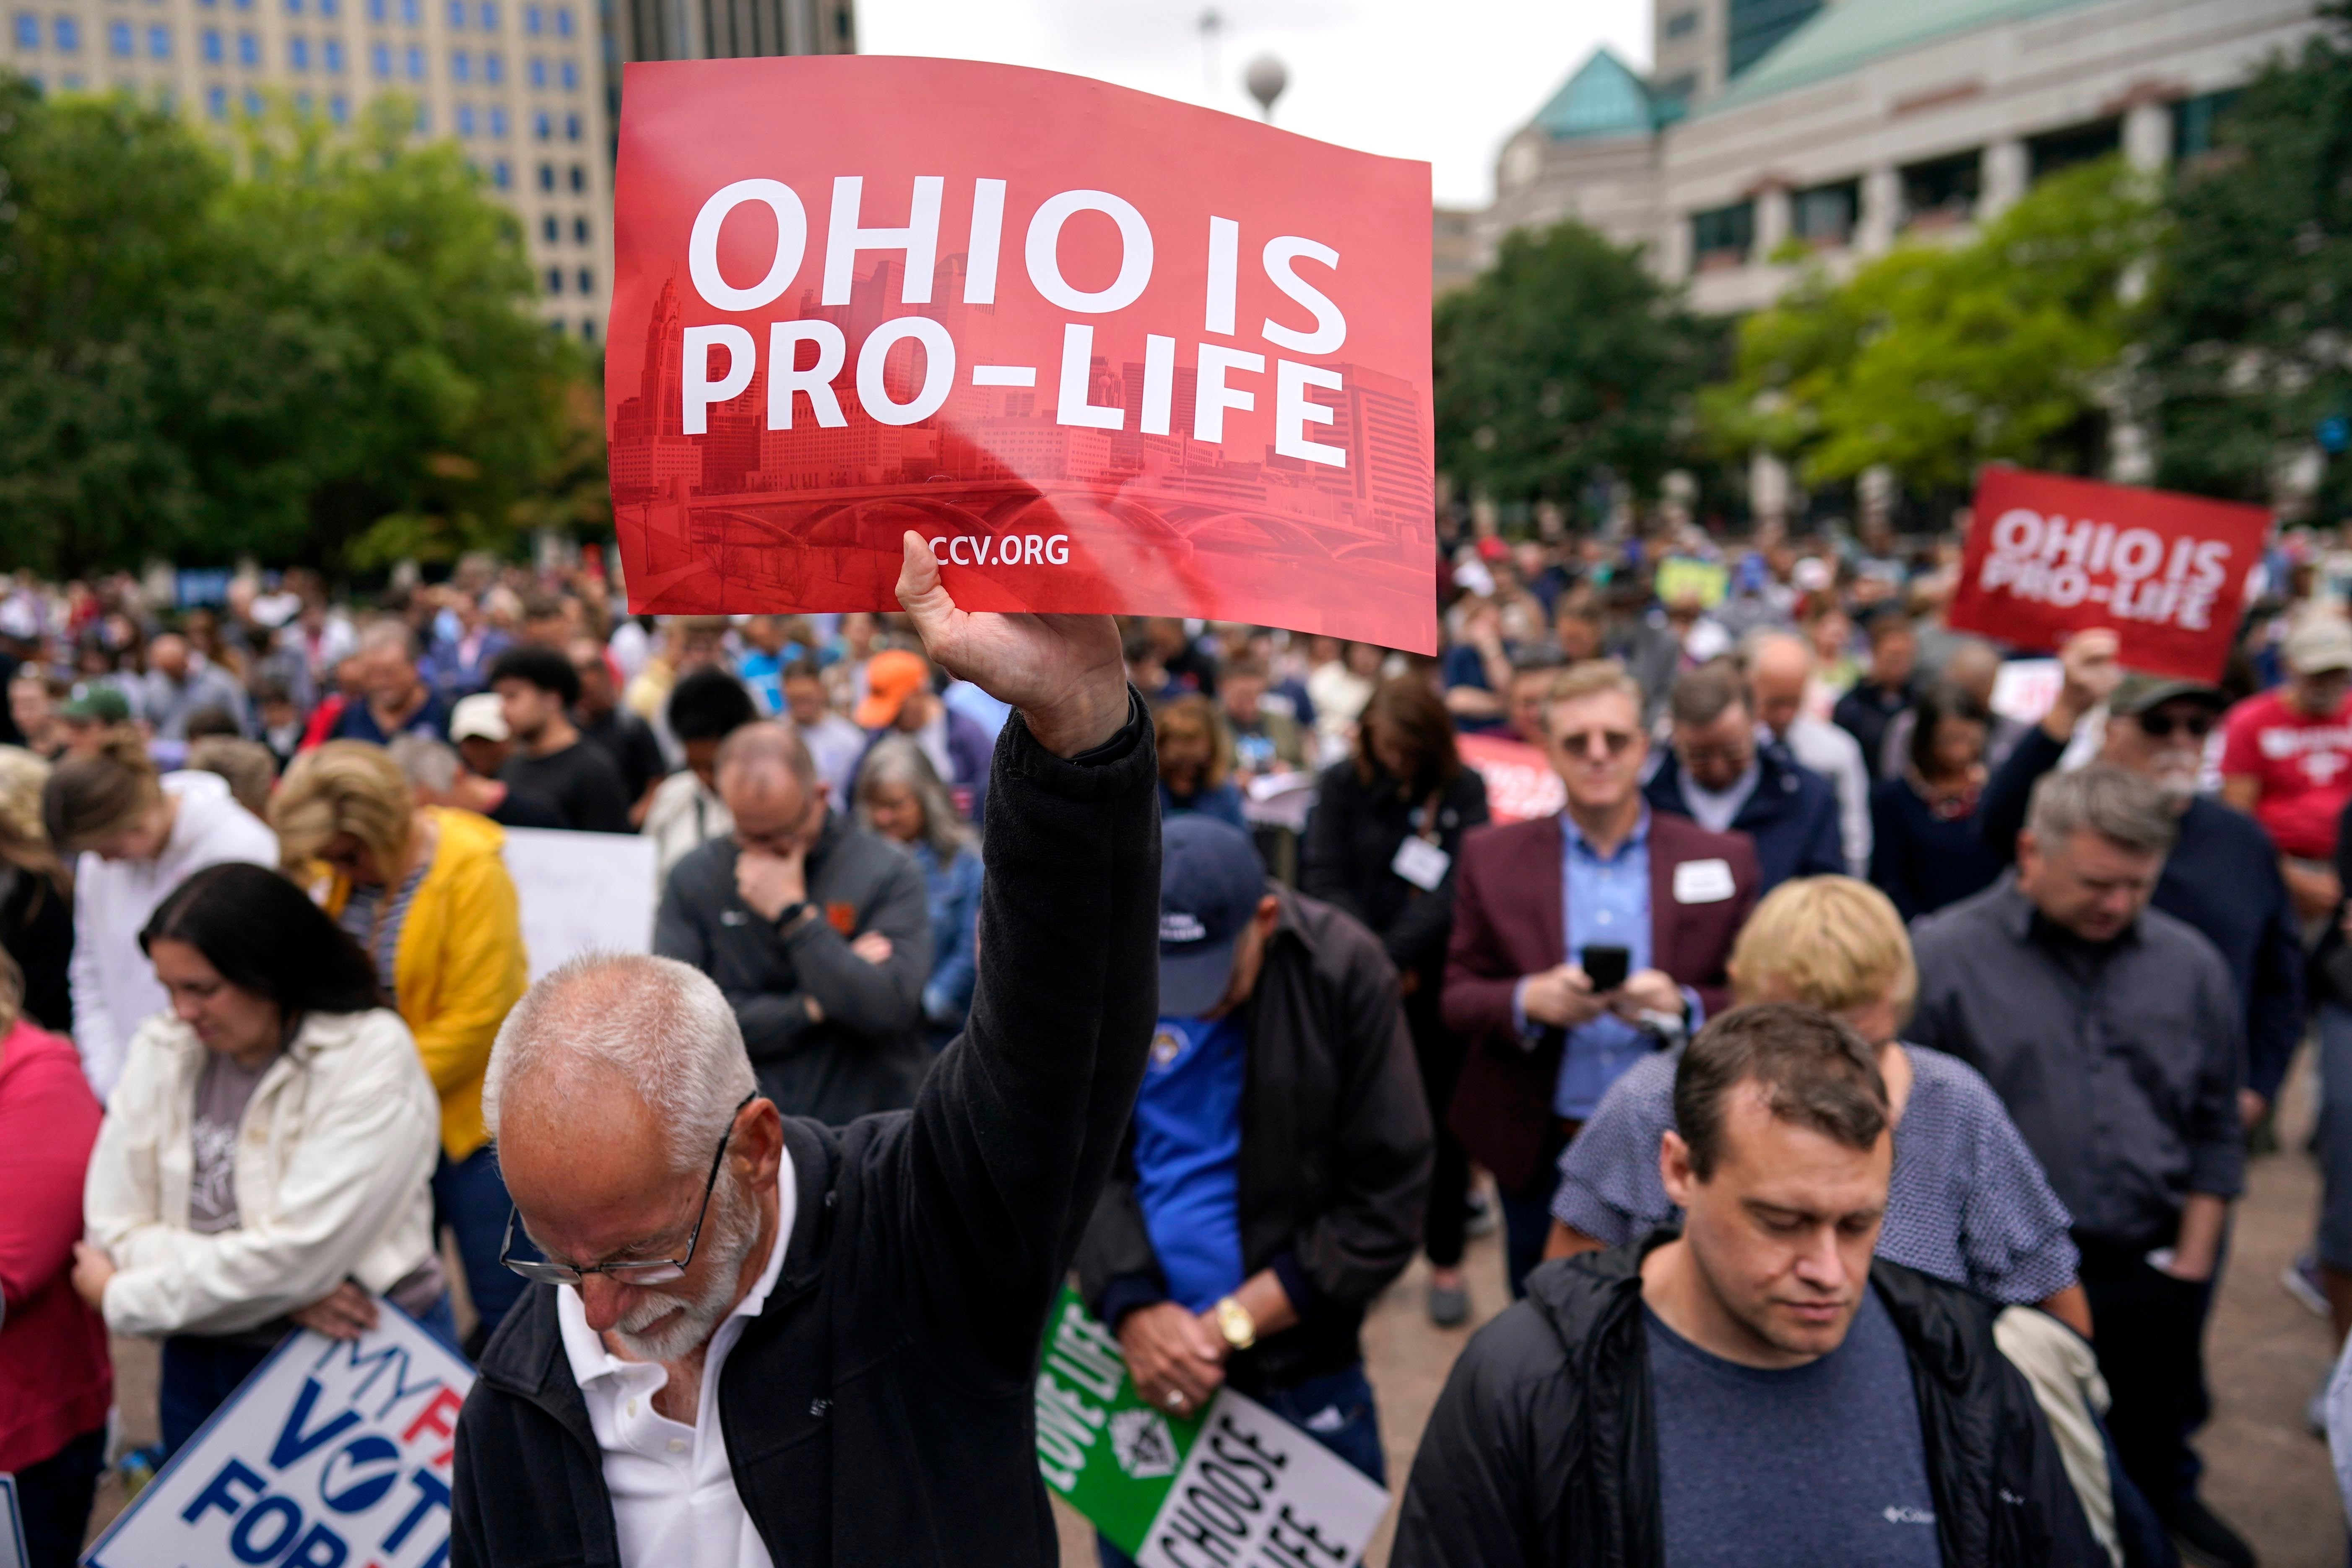 Anti-abortion demonstrators march in the Ohio March for Life